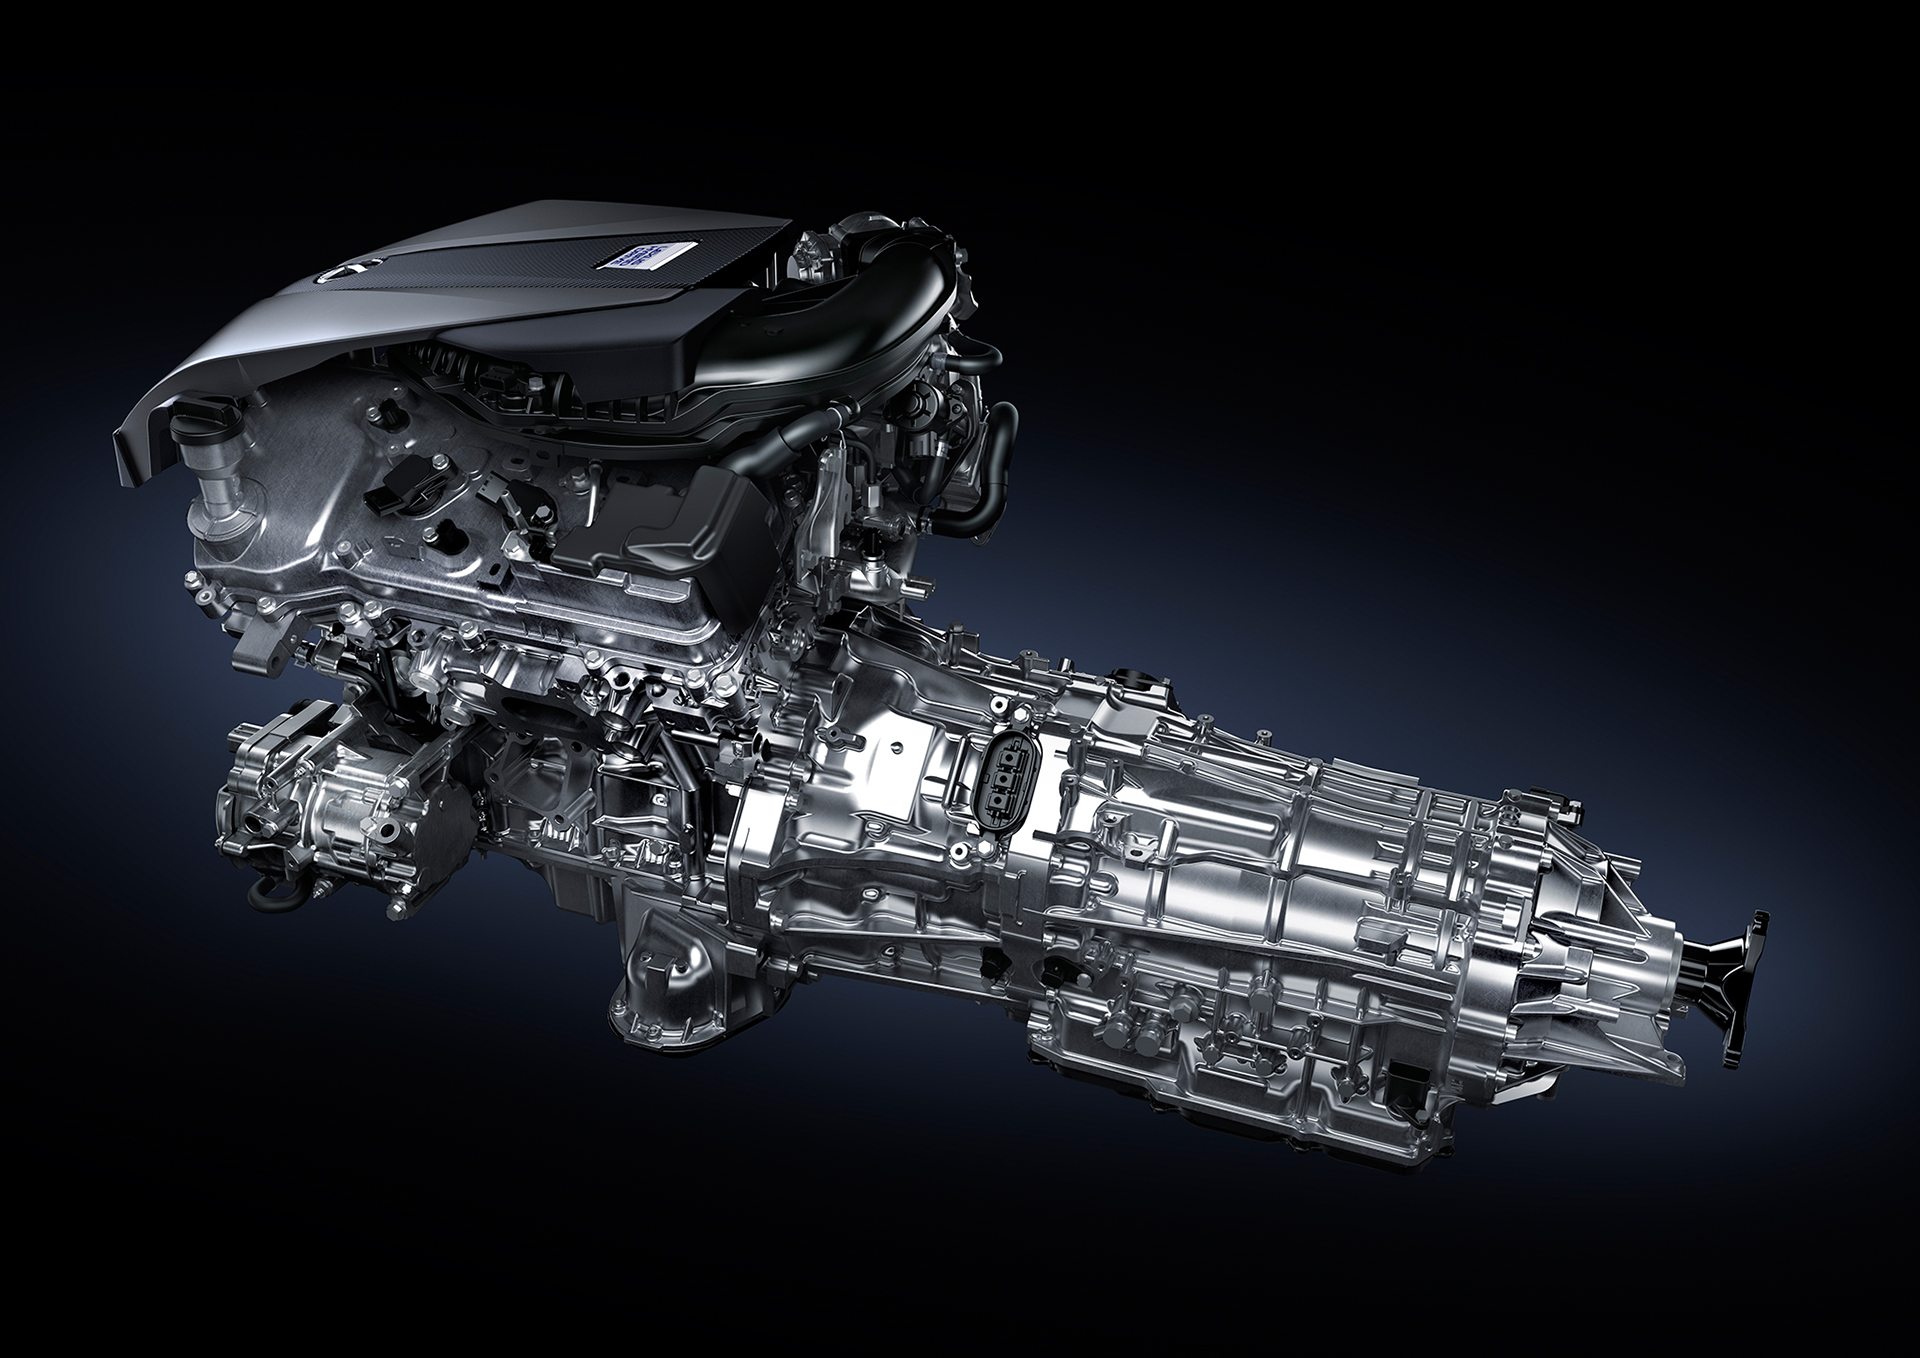 Lexus Lc 500h Multi Stage Hybrid System Engine And Transmission